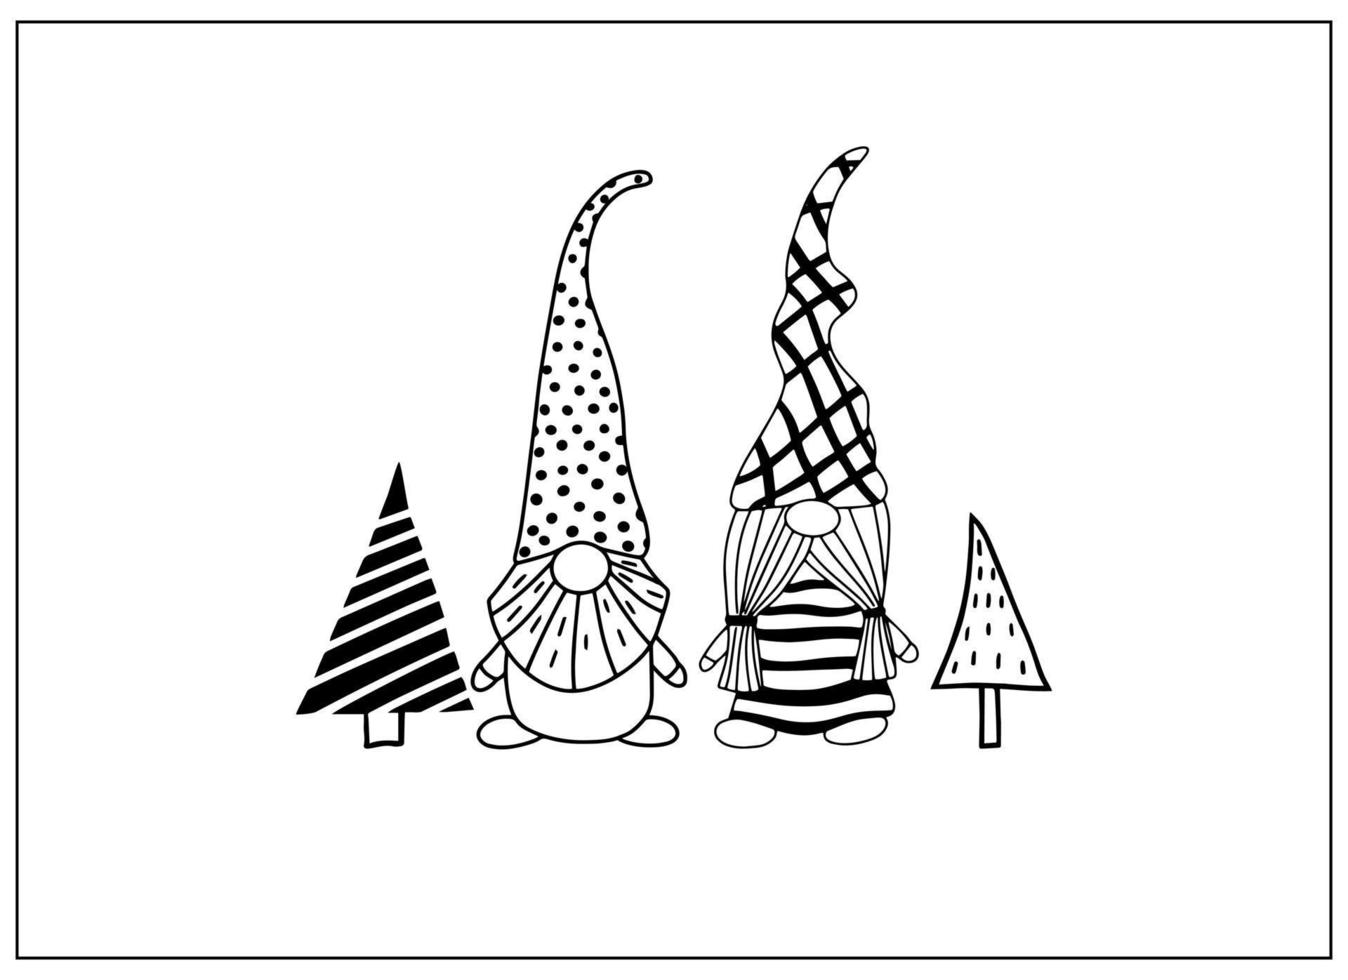 Cute doodle characters gnomes hand drawn. Scandinavian style greeting card. vector